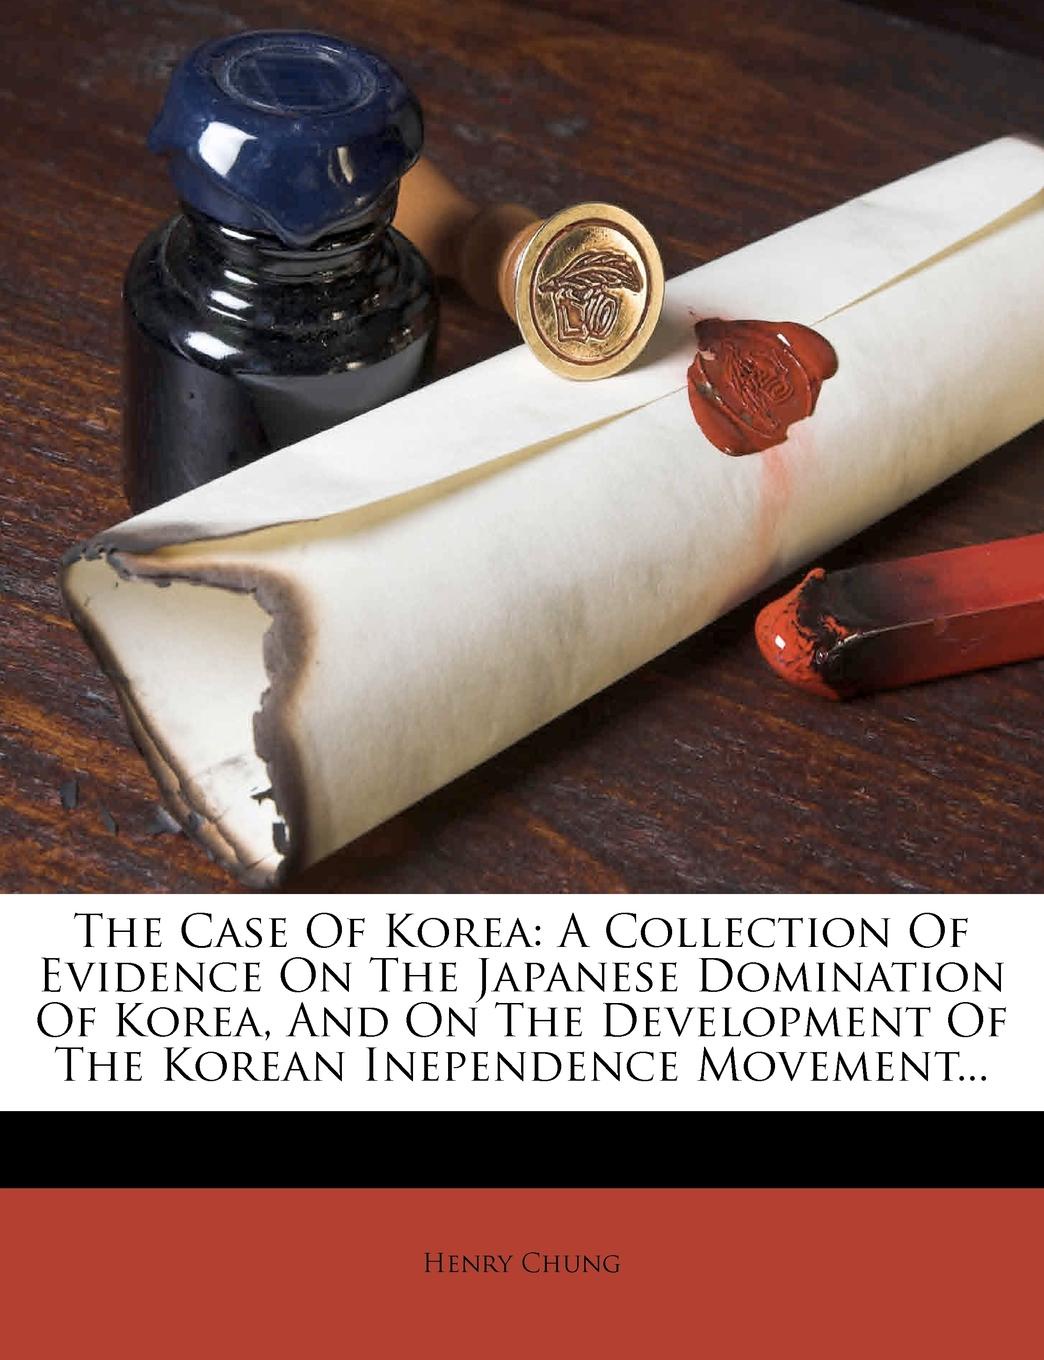 The Case Of Korea. A Collection Of Evidence On The Japanese Domination Of Korea, And On The Development Of The Korean Inependence Movement...